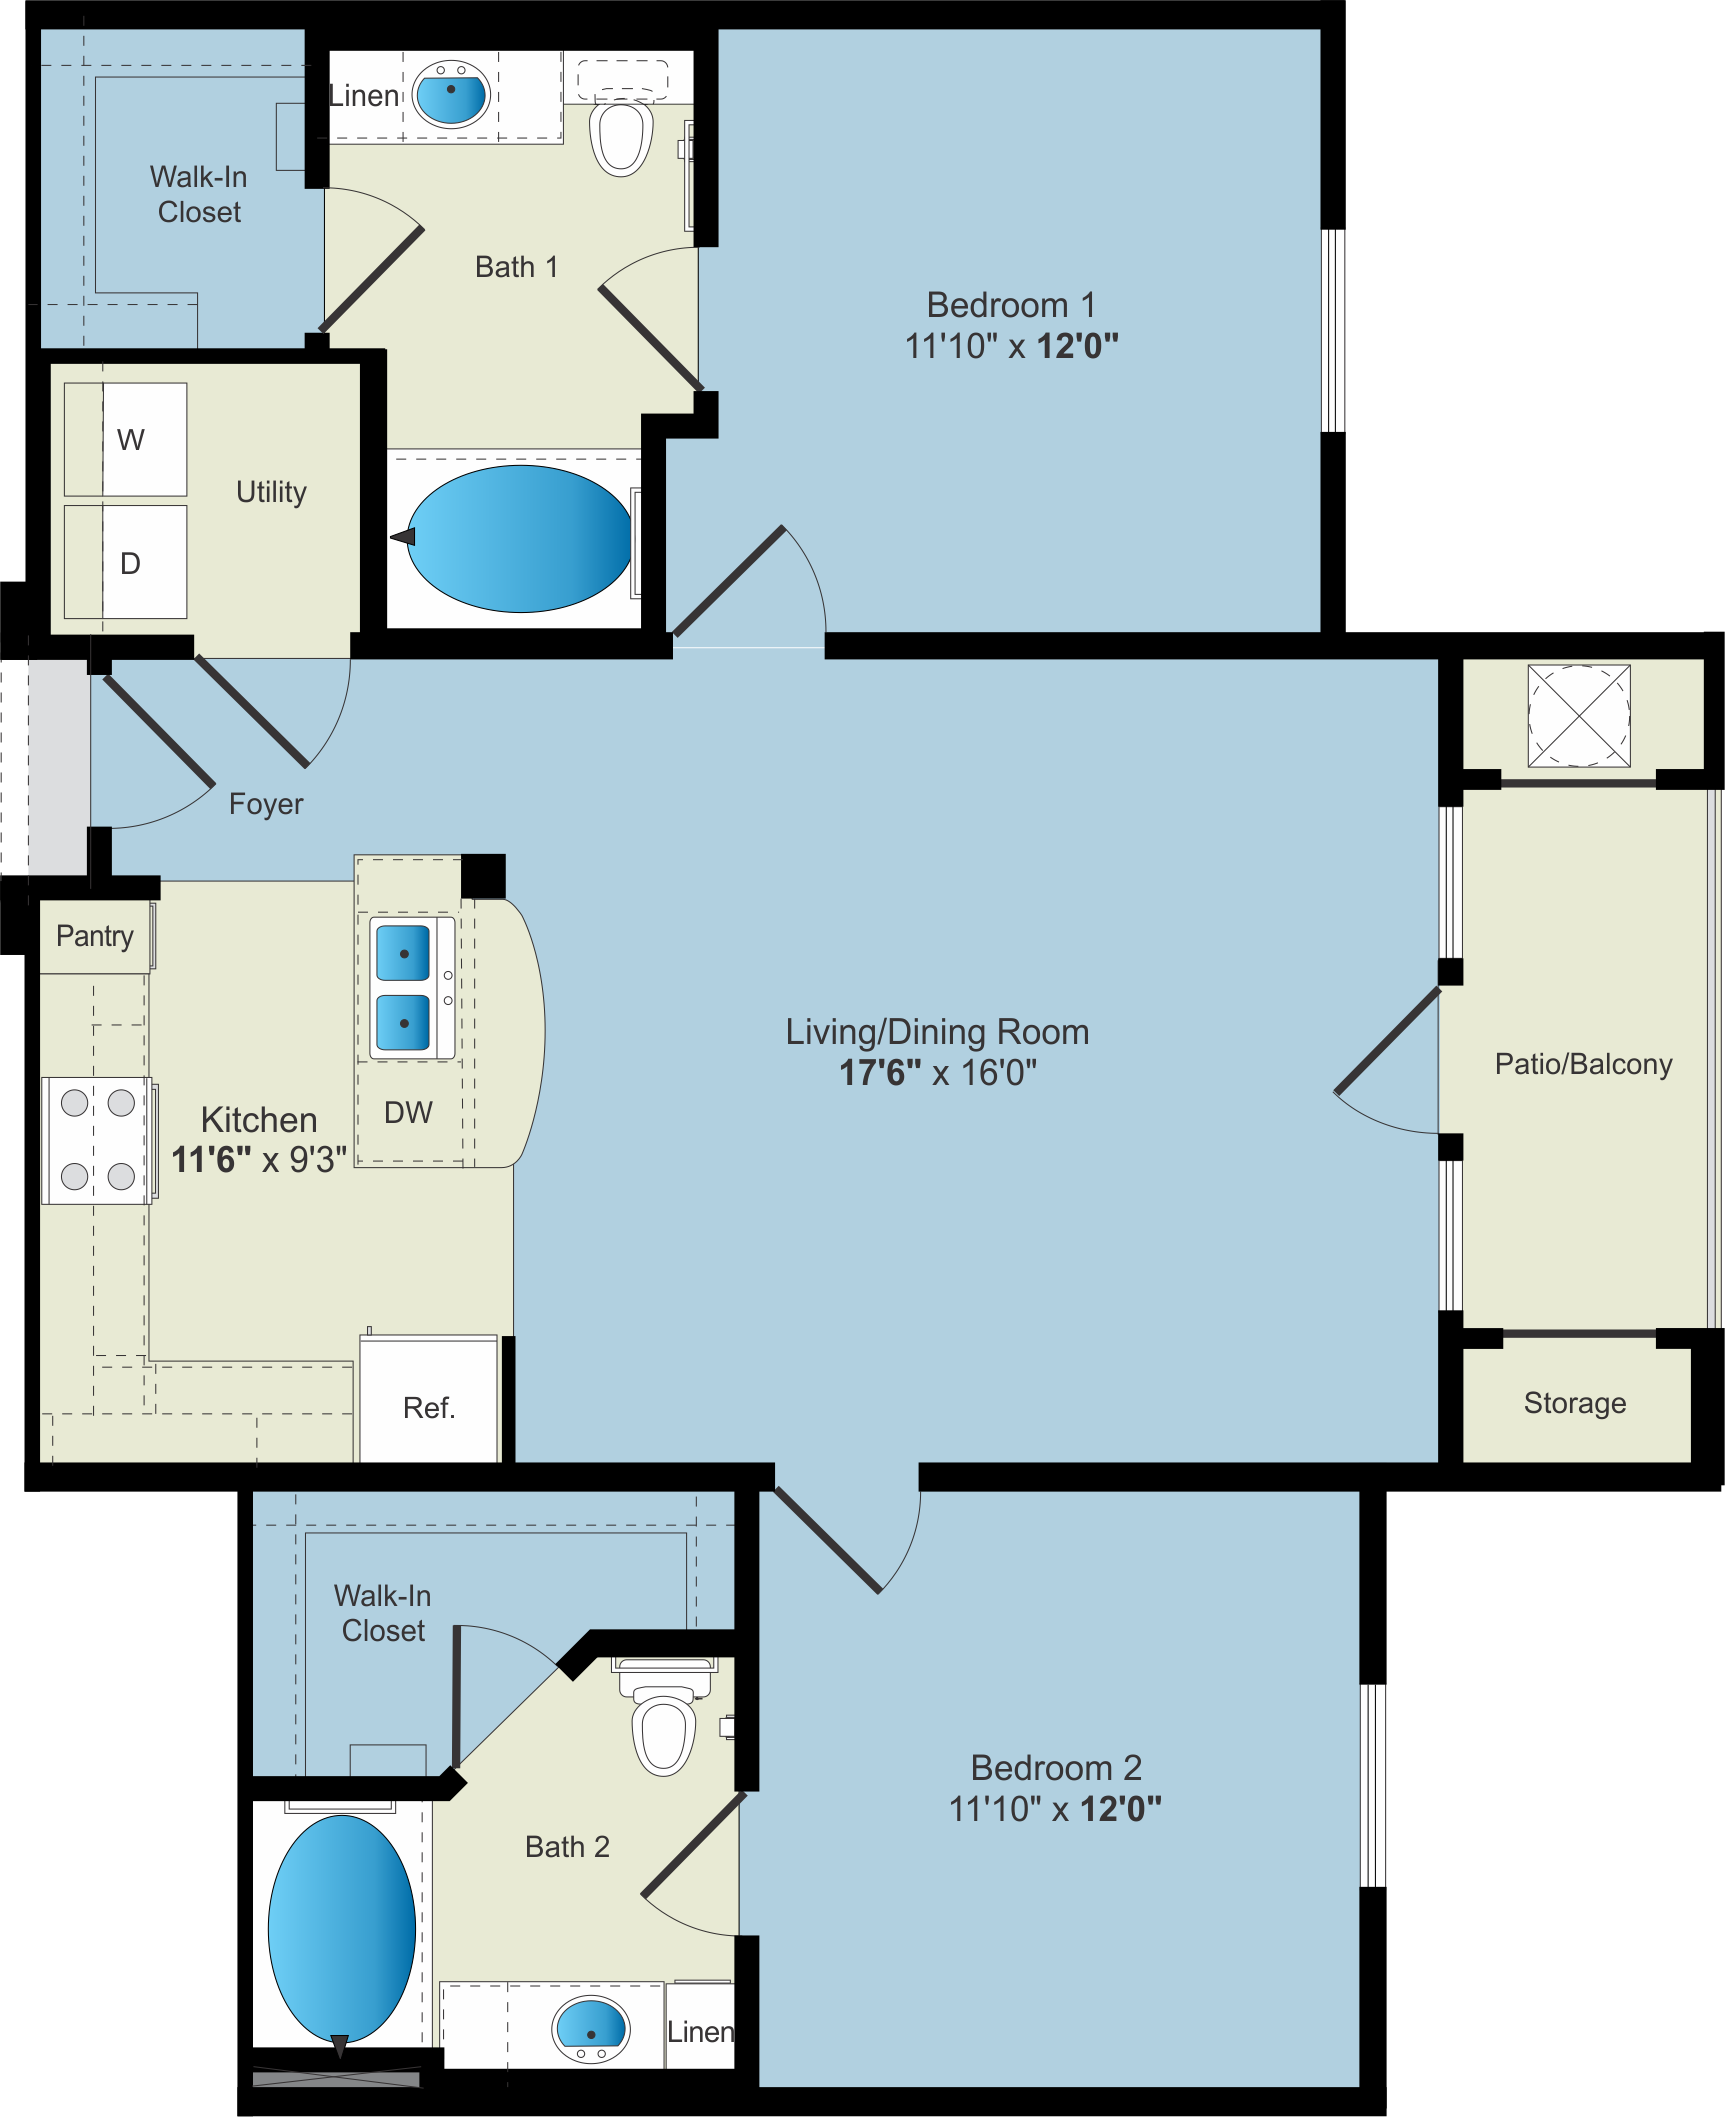 Apartment Rentals: A floor plan for a two bedroom apartment.